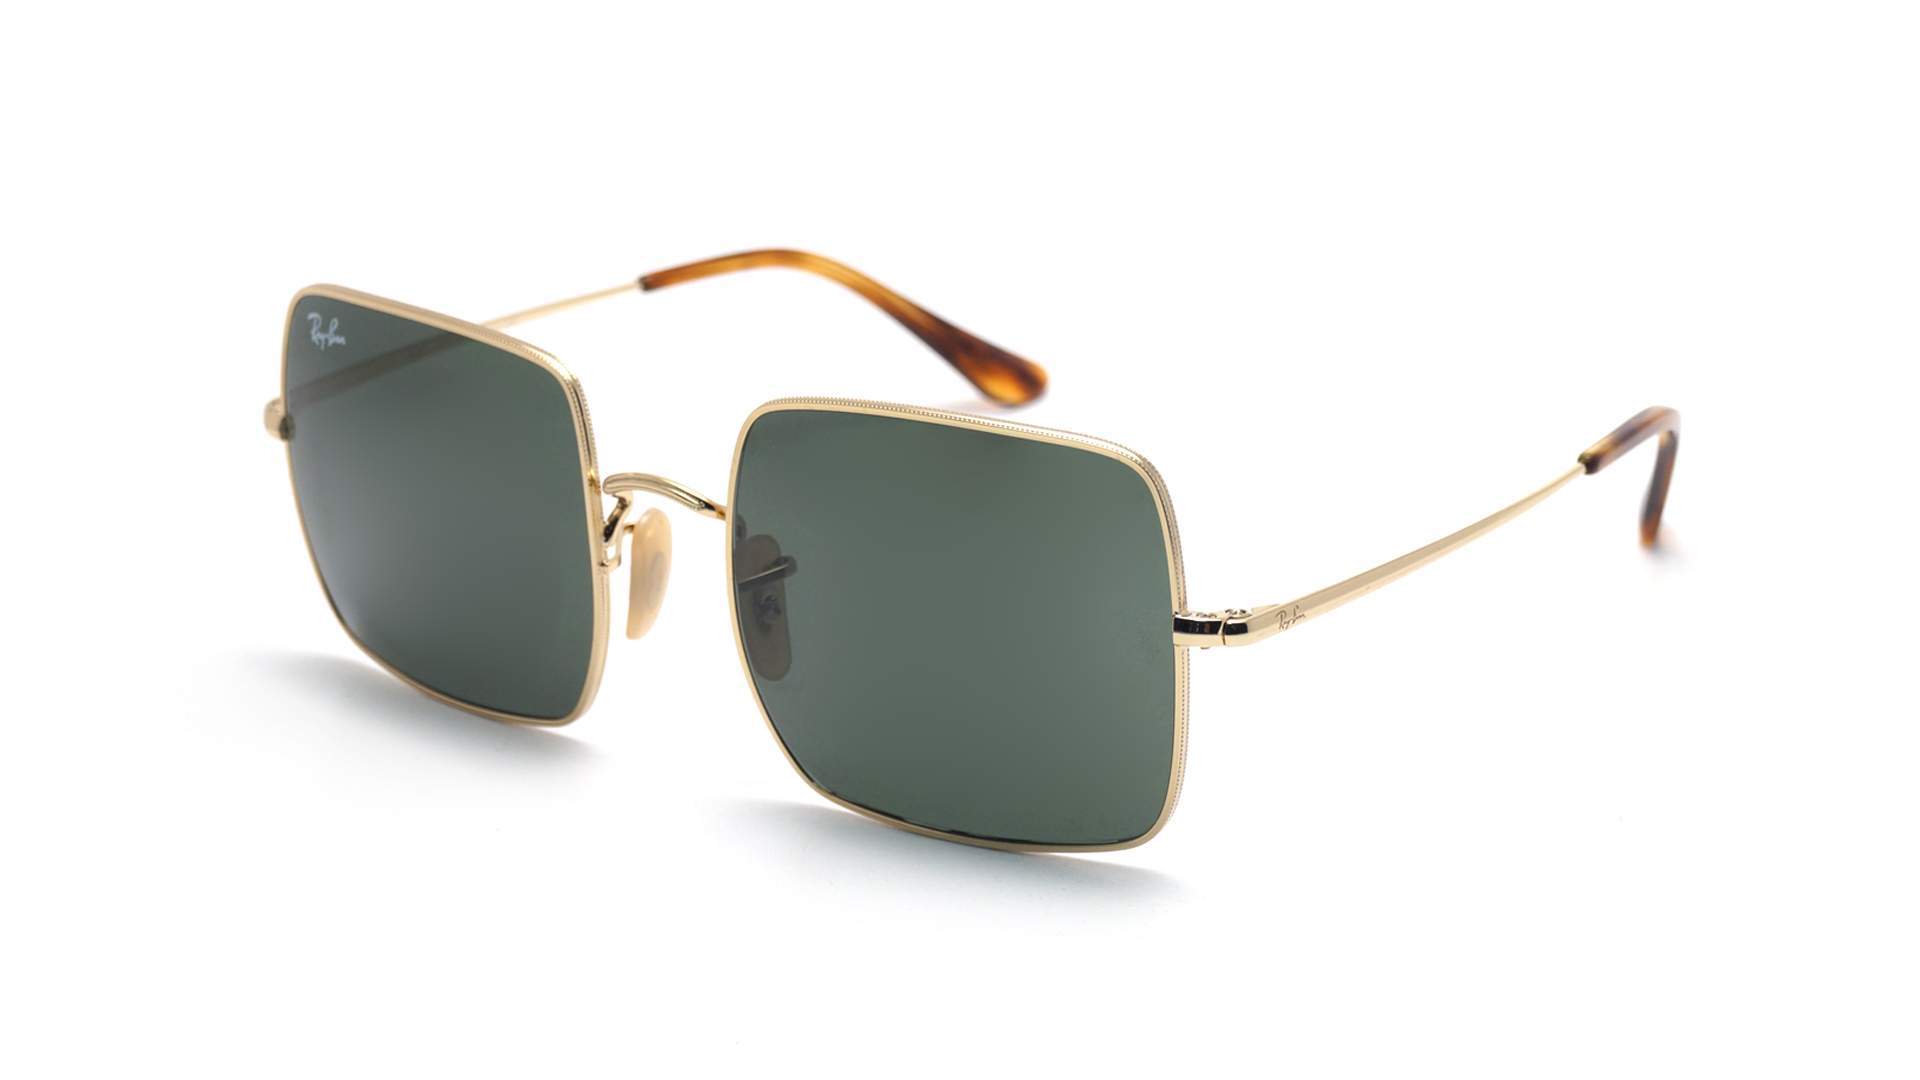 Sunglass Ray-Ban Square Classic Or 